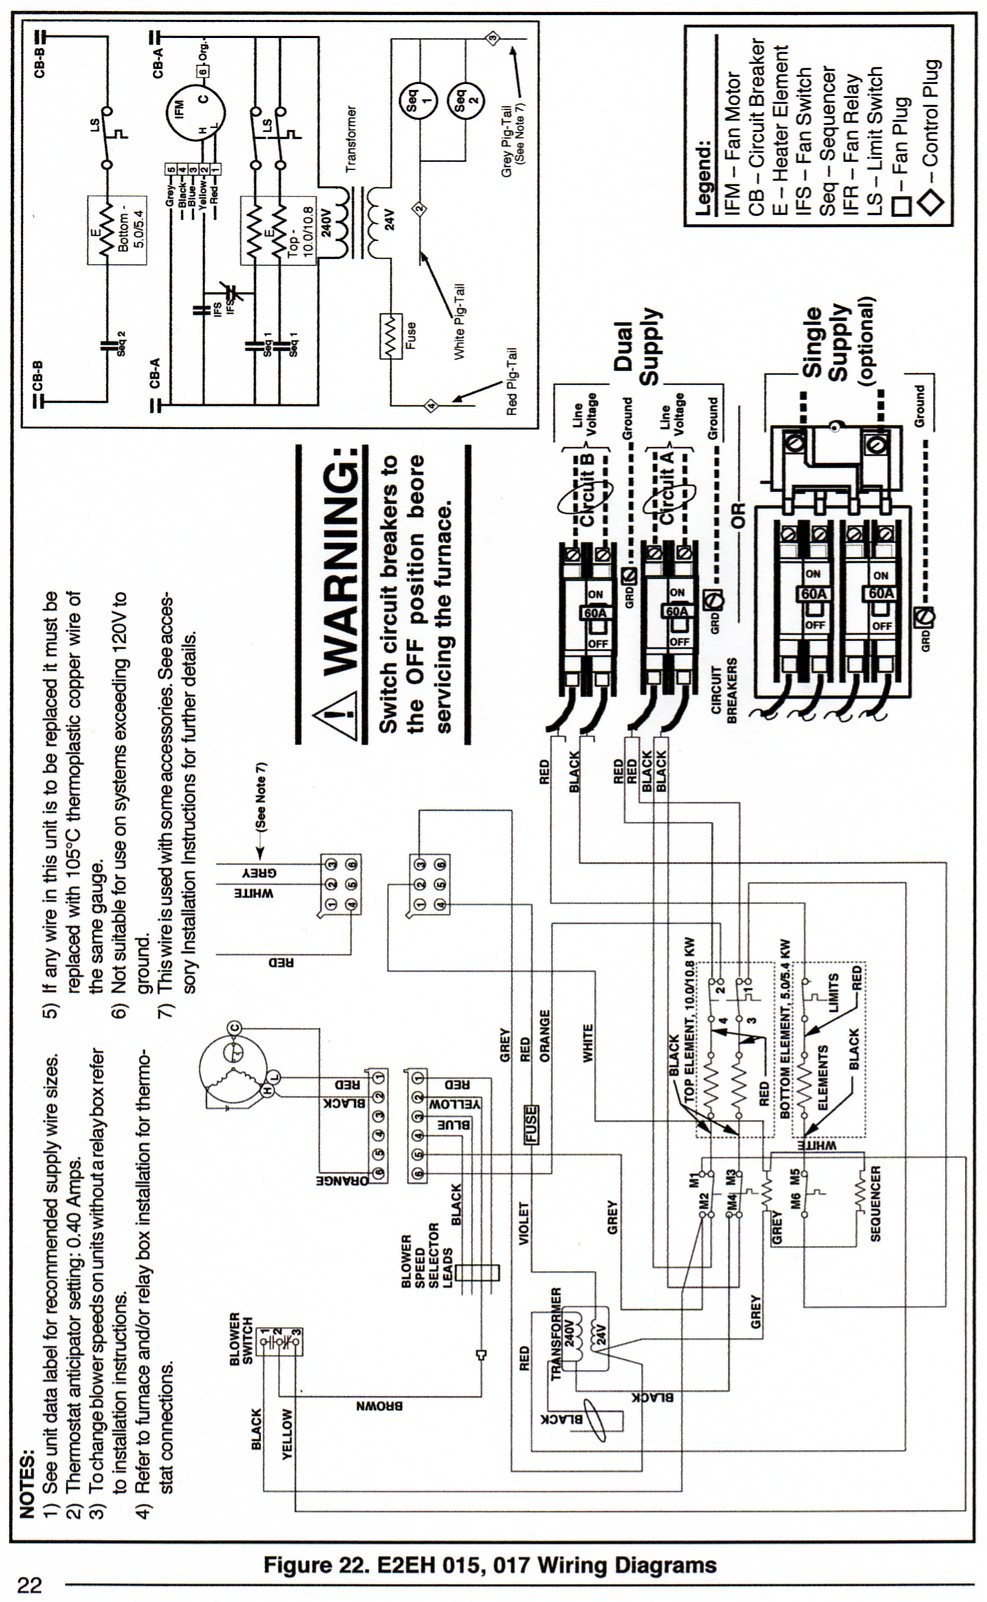 Stunning Intertherm Electric Furnace Wiring Diagram 80 About Remodel Cat 5 Wiring Diagram B with Intertherm Electric Furnace Wiring Diagram